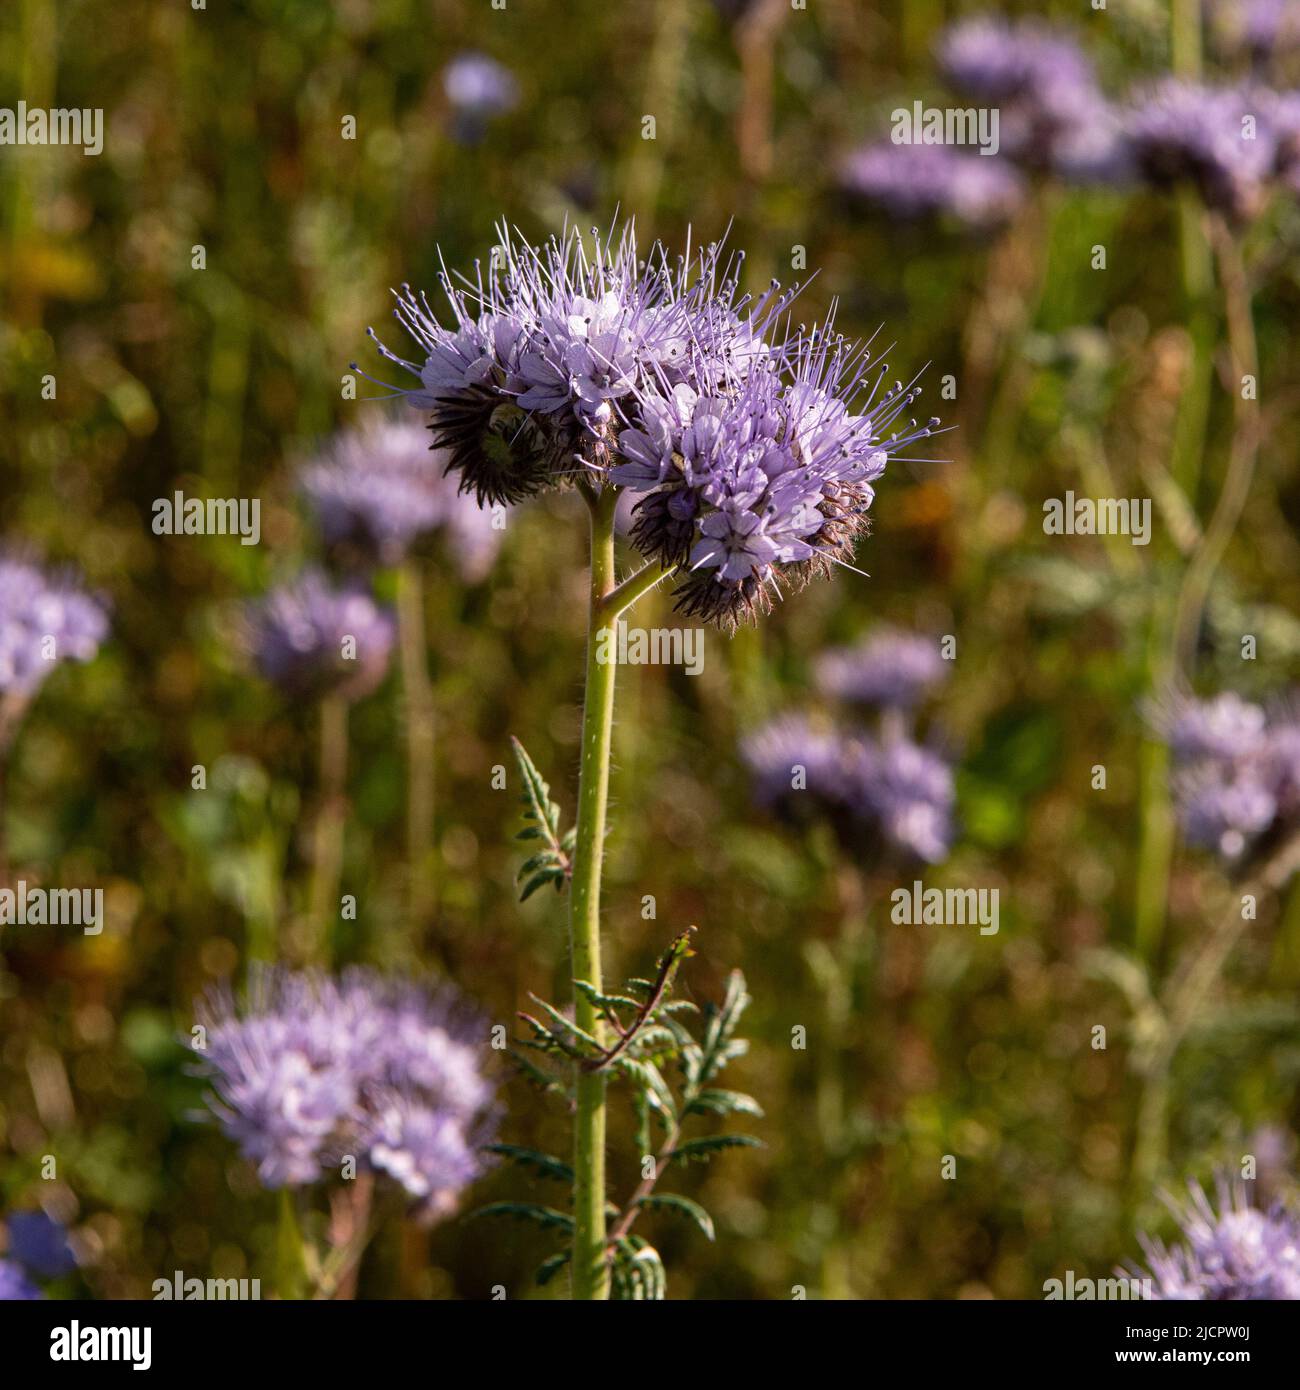 Cornwall, UK, 15/06/2022, Cornish fields growing Phacelia, listed as one of the top 20 honey-producing flowers for honeybees Credit: kathleen white/Alamy Live News Stock Photo